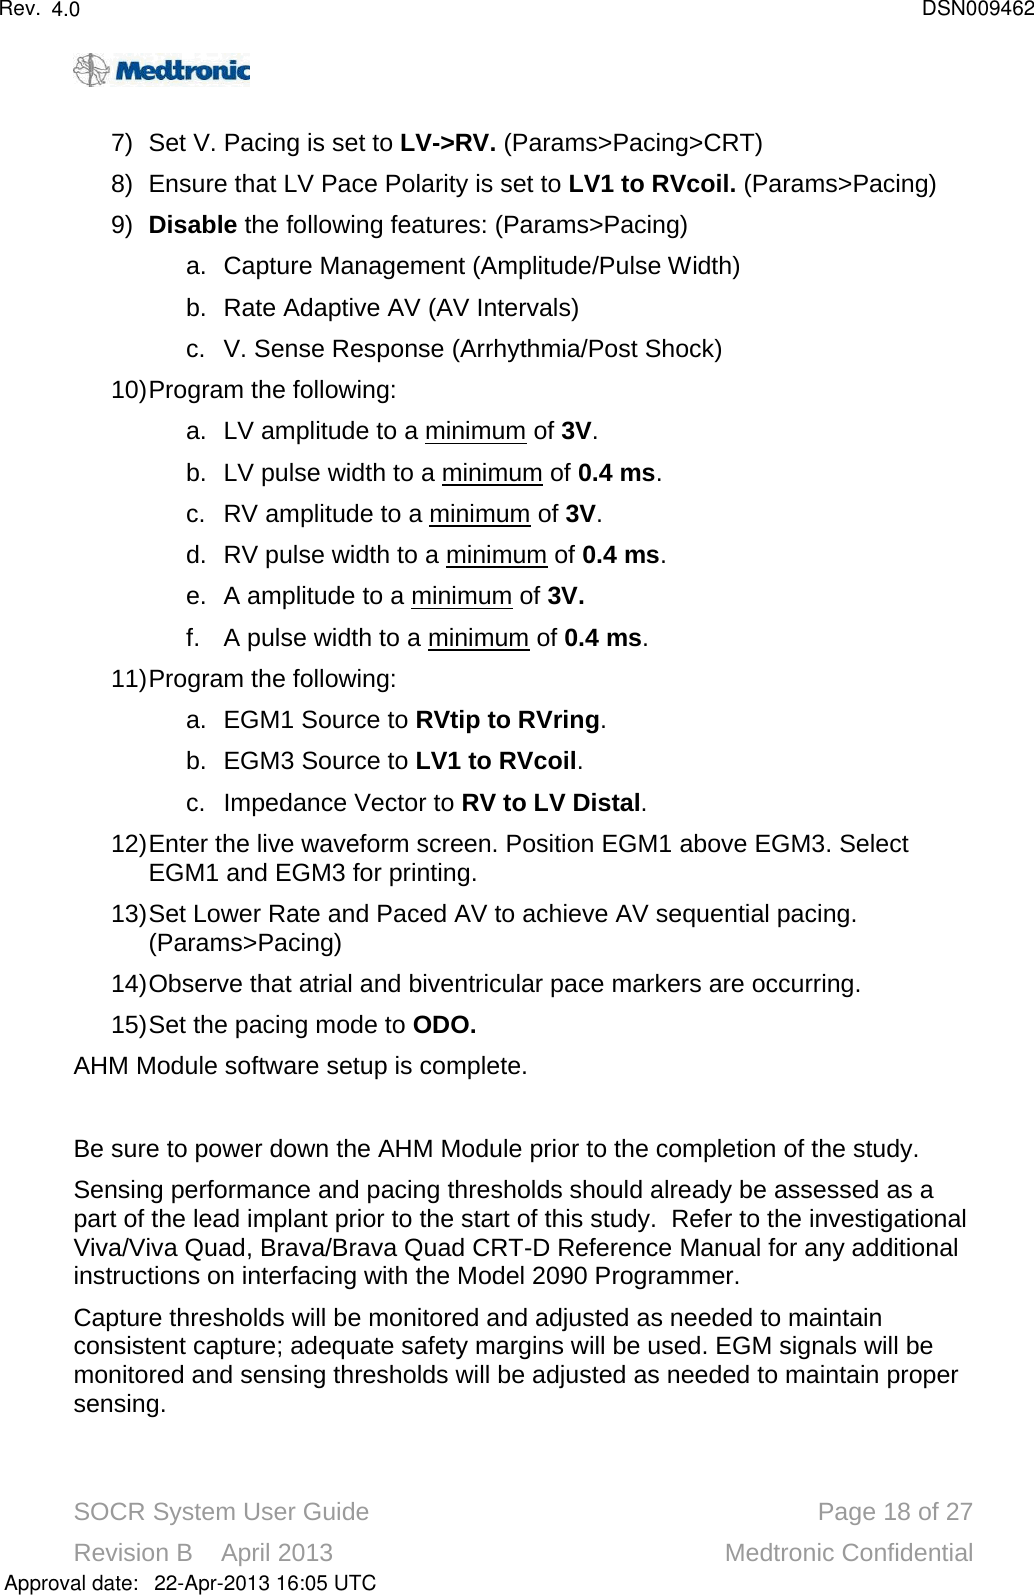 SOCR System User Guide Page 18 of 27Revision B    April 2013 Medtronic Confidential7) Set V. Pacing is set to LV-&gt;RV. (Params&gt;Pacing&gt;CRT)8) Ensure that LV Pace Polarity is set to LV1 to RVcoil.(Params&gt;Pacing)9) Disable the following features:(Params&gt;Pacing)a. Capture Management (Amplitude/Pulse Width)b. Rate Adaptive AV (AV Intervals)c. V. Sense Response (Arrhythmia/Post Shock)10)Program the following:a. LV amplitude to a minimum of 3V.b. LV pulse width to a minimum of 0.4 ms.c. RV amplitude to a minimum of 3V.d. RV pulse width to a minimum of 0.4 ms.e. A amplitude to a minimum of 3V.f. A pulse width to a minimum of 0.4 ms.11)Program the following:a. EGM1 Source to RVtip to RVring.b. EGM3 Source to LV1 to RVcoil.c. Impedance Vector to RV to LV Distal.12)Enter the live waveform screen. Position EGM1 above EGM3. Select EGM1 and EGM3 for printing.13)Set Lower Rate and Paced AV to achieve AV sequential pacing. (Params&gt;Pacing)14)Observe that atrial and biventricular pace markers are occurring. 15)Set the pacing mode to ODO.AHM Module software setup is complete.Be sure to power down the AHM Module prior to the completion of the study.Sensing performance and pacing thresholds should already be assessed as a part of the lead implant prior to the start of this study. Refer to the investigational Viva/Viva Quad, Brava/Brava Quad CRT-D Reference Manual for any additional instructions on interfacing with the Model 2090 Programmer.Capture thresholds will be monitored and adjusted as needed to maintain consistent capture; adequate safety margins will be used. EGM signals will be monitored and sensing thresholds will be adjusted as needed to maintain proper sensing. Approval date:4.0 DSN00946222-Apr-2013 16:05 UTCRev.